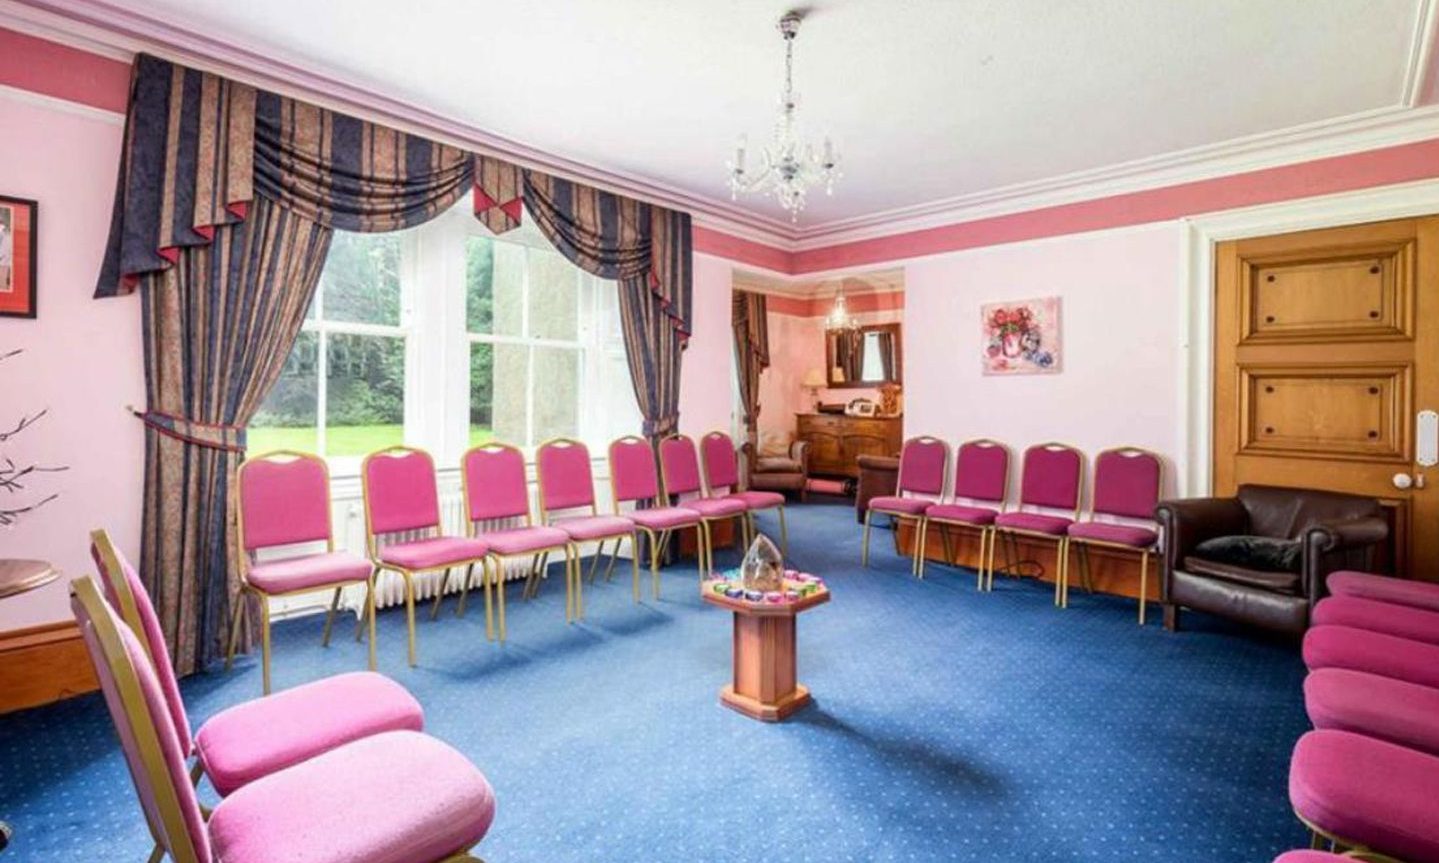 Inside the seance room at Kingswells House in Aberdeen.